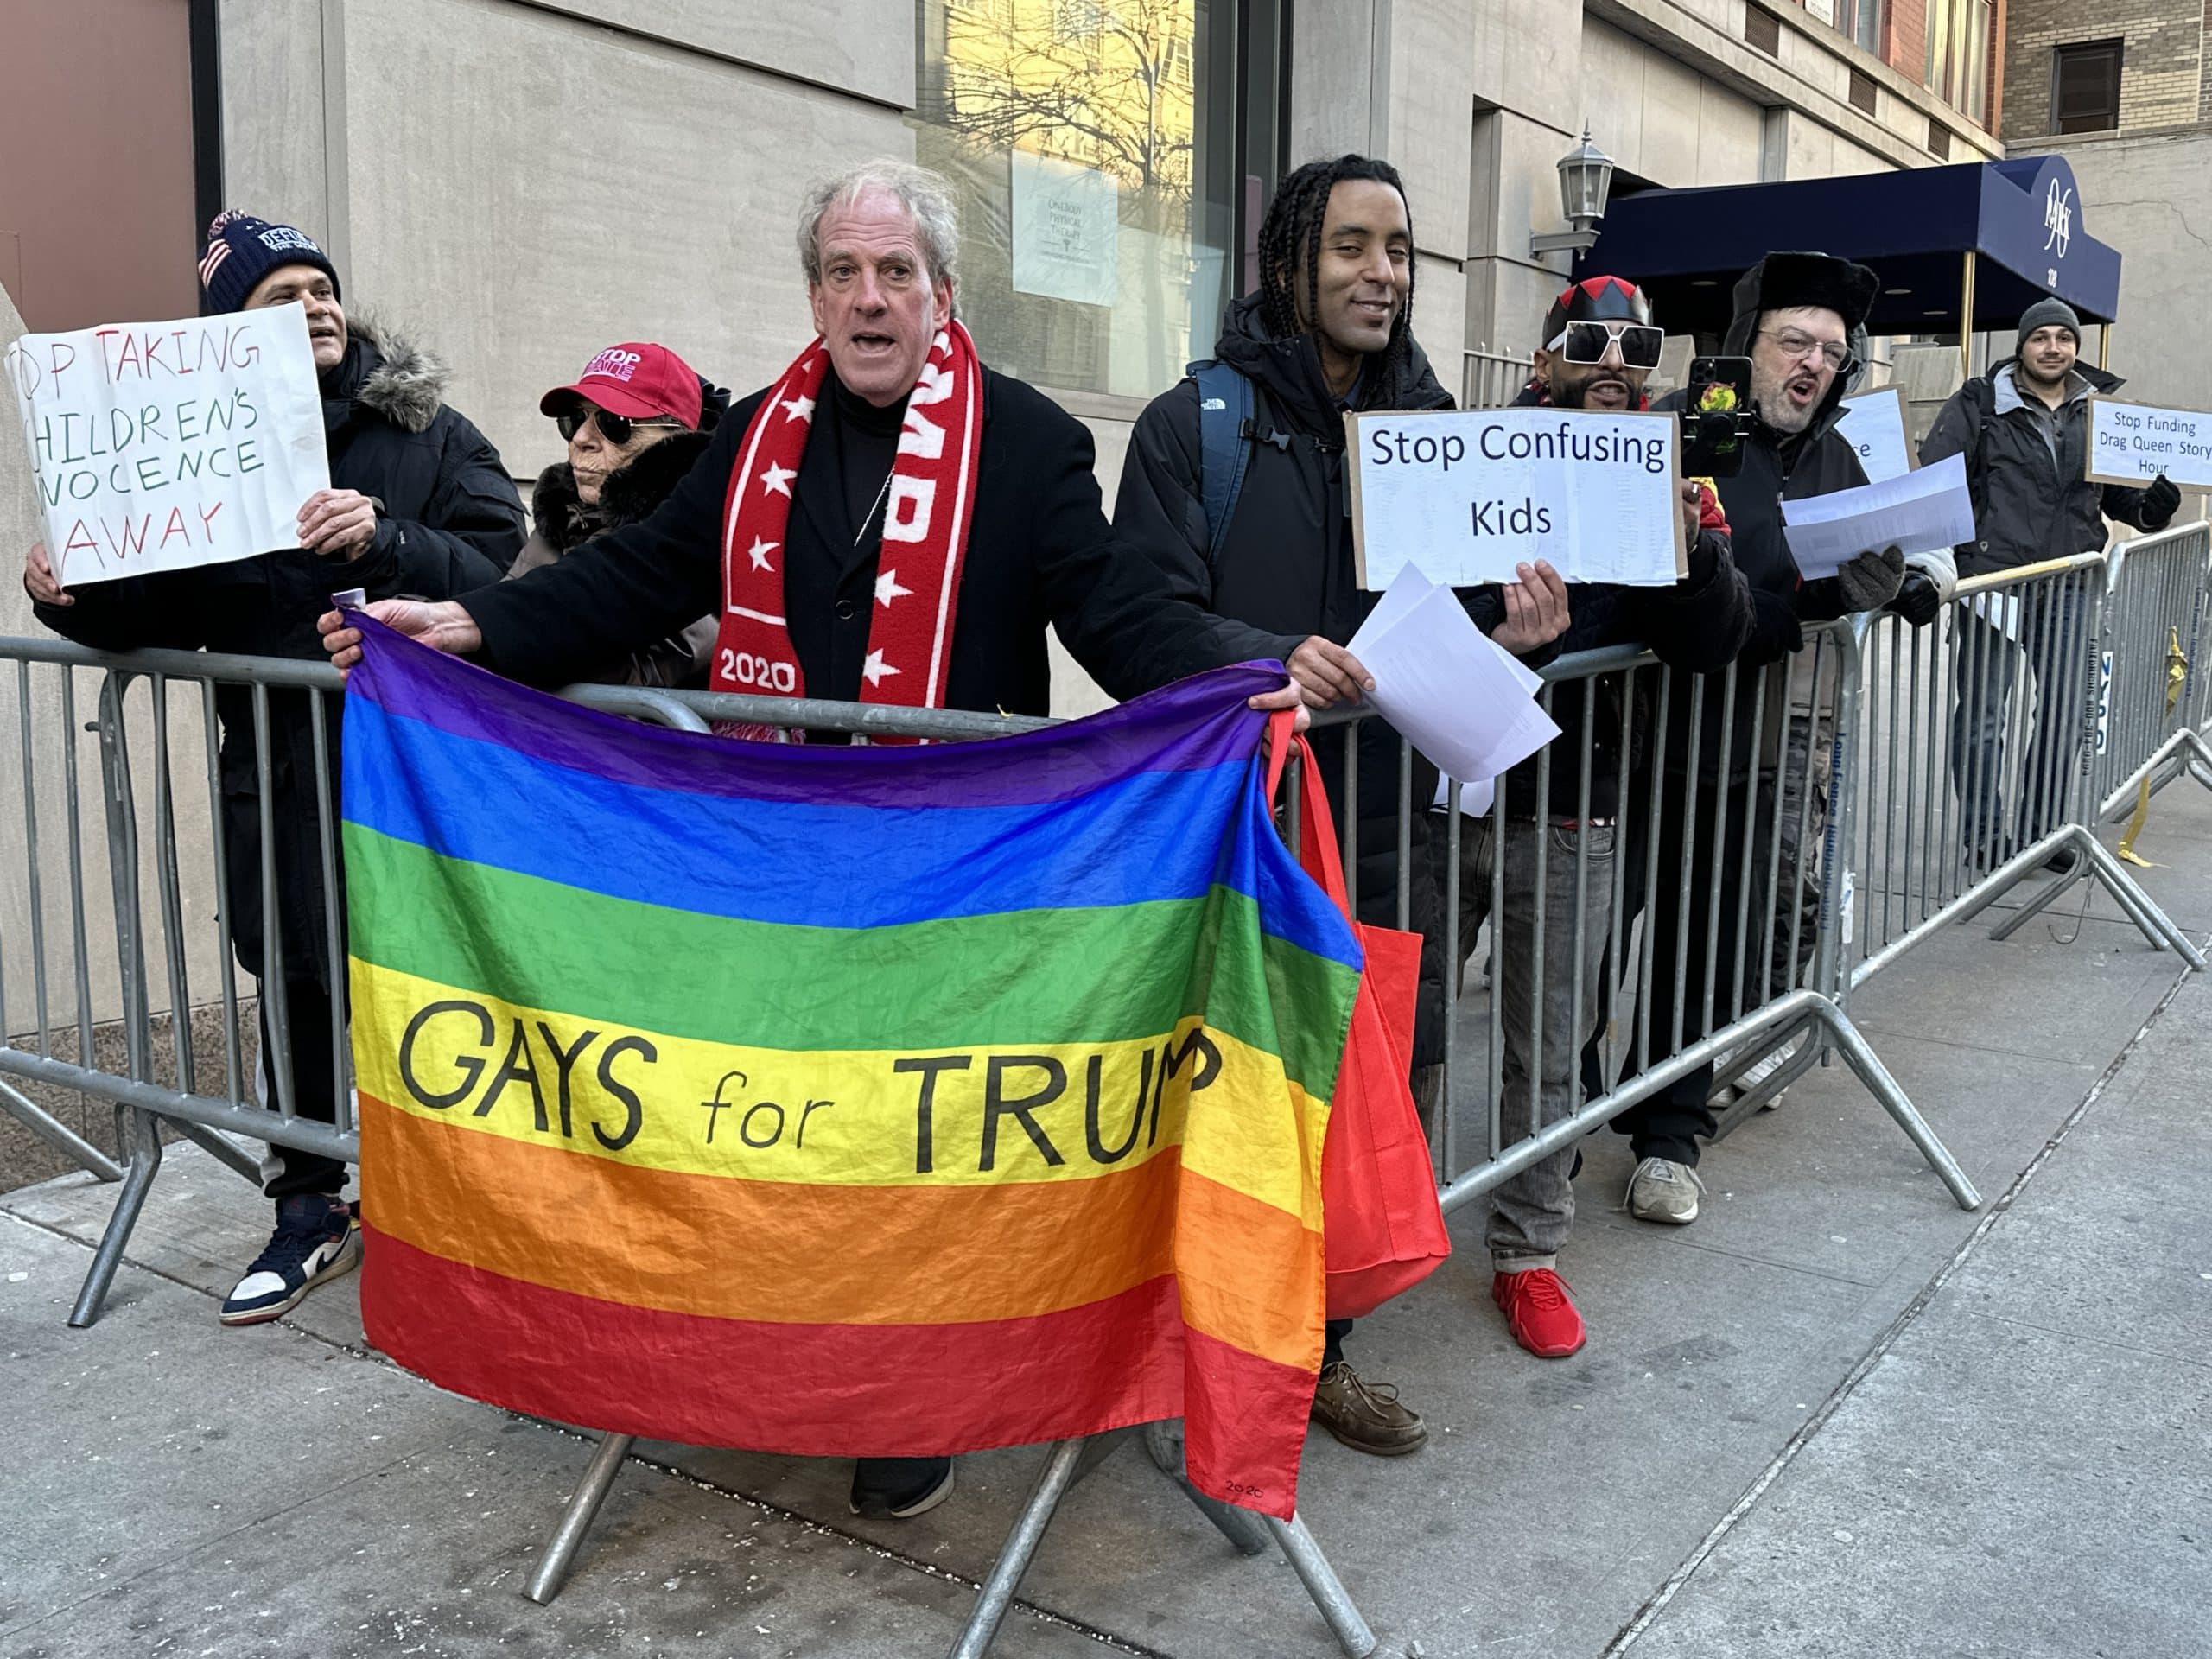 Right wing activists protest Drag Story Hour at Upper East Side library | Upper East Site